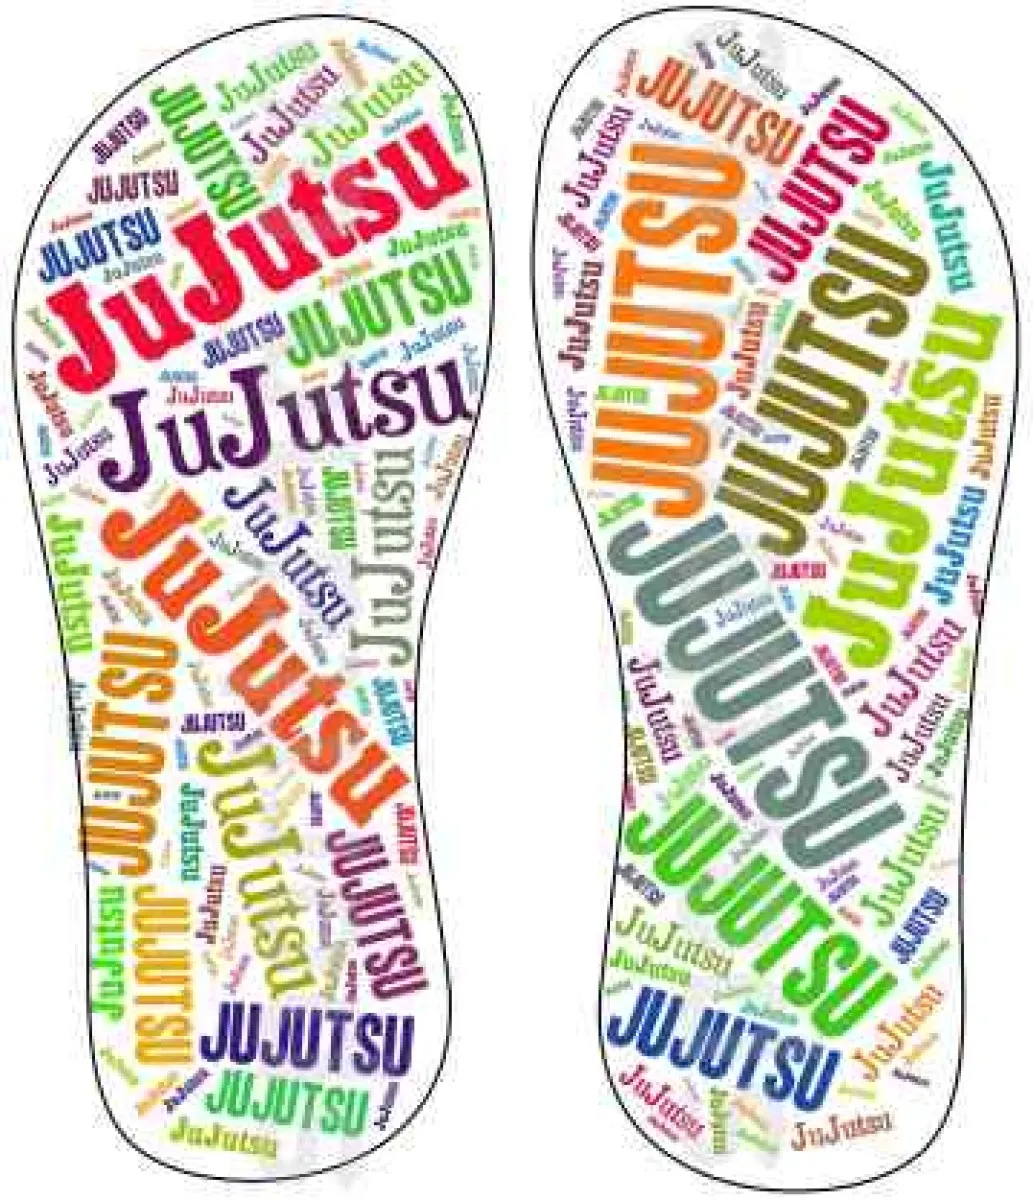 Flip flop with text print